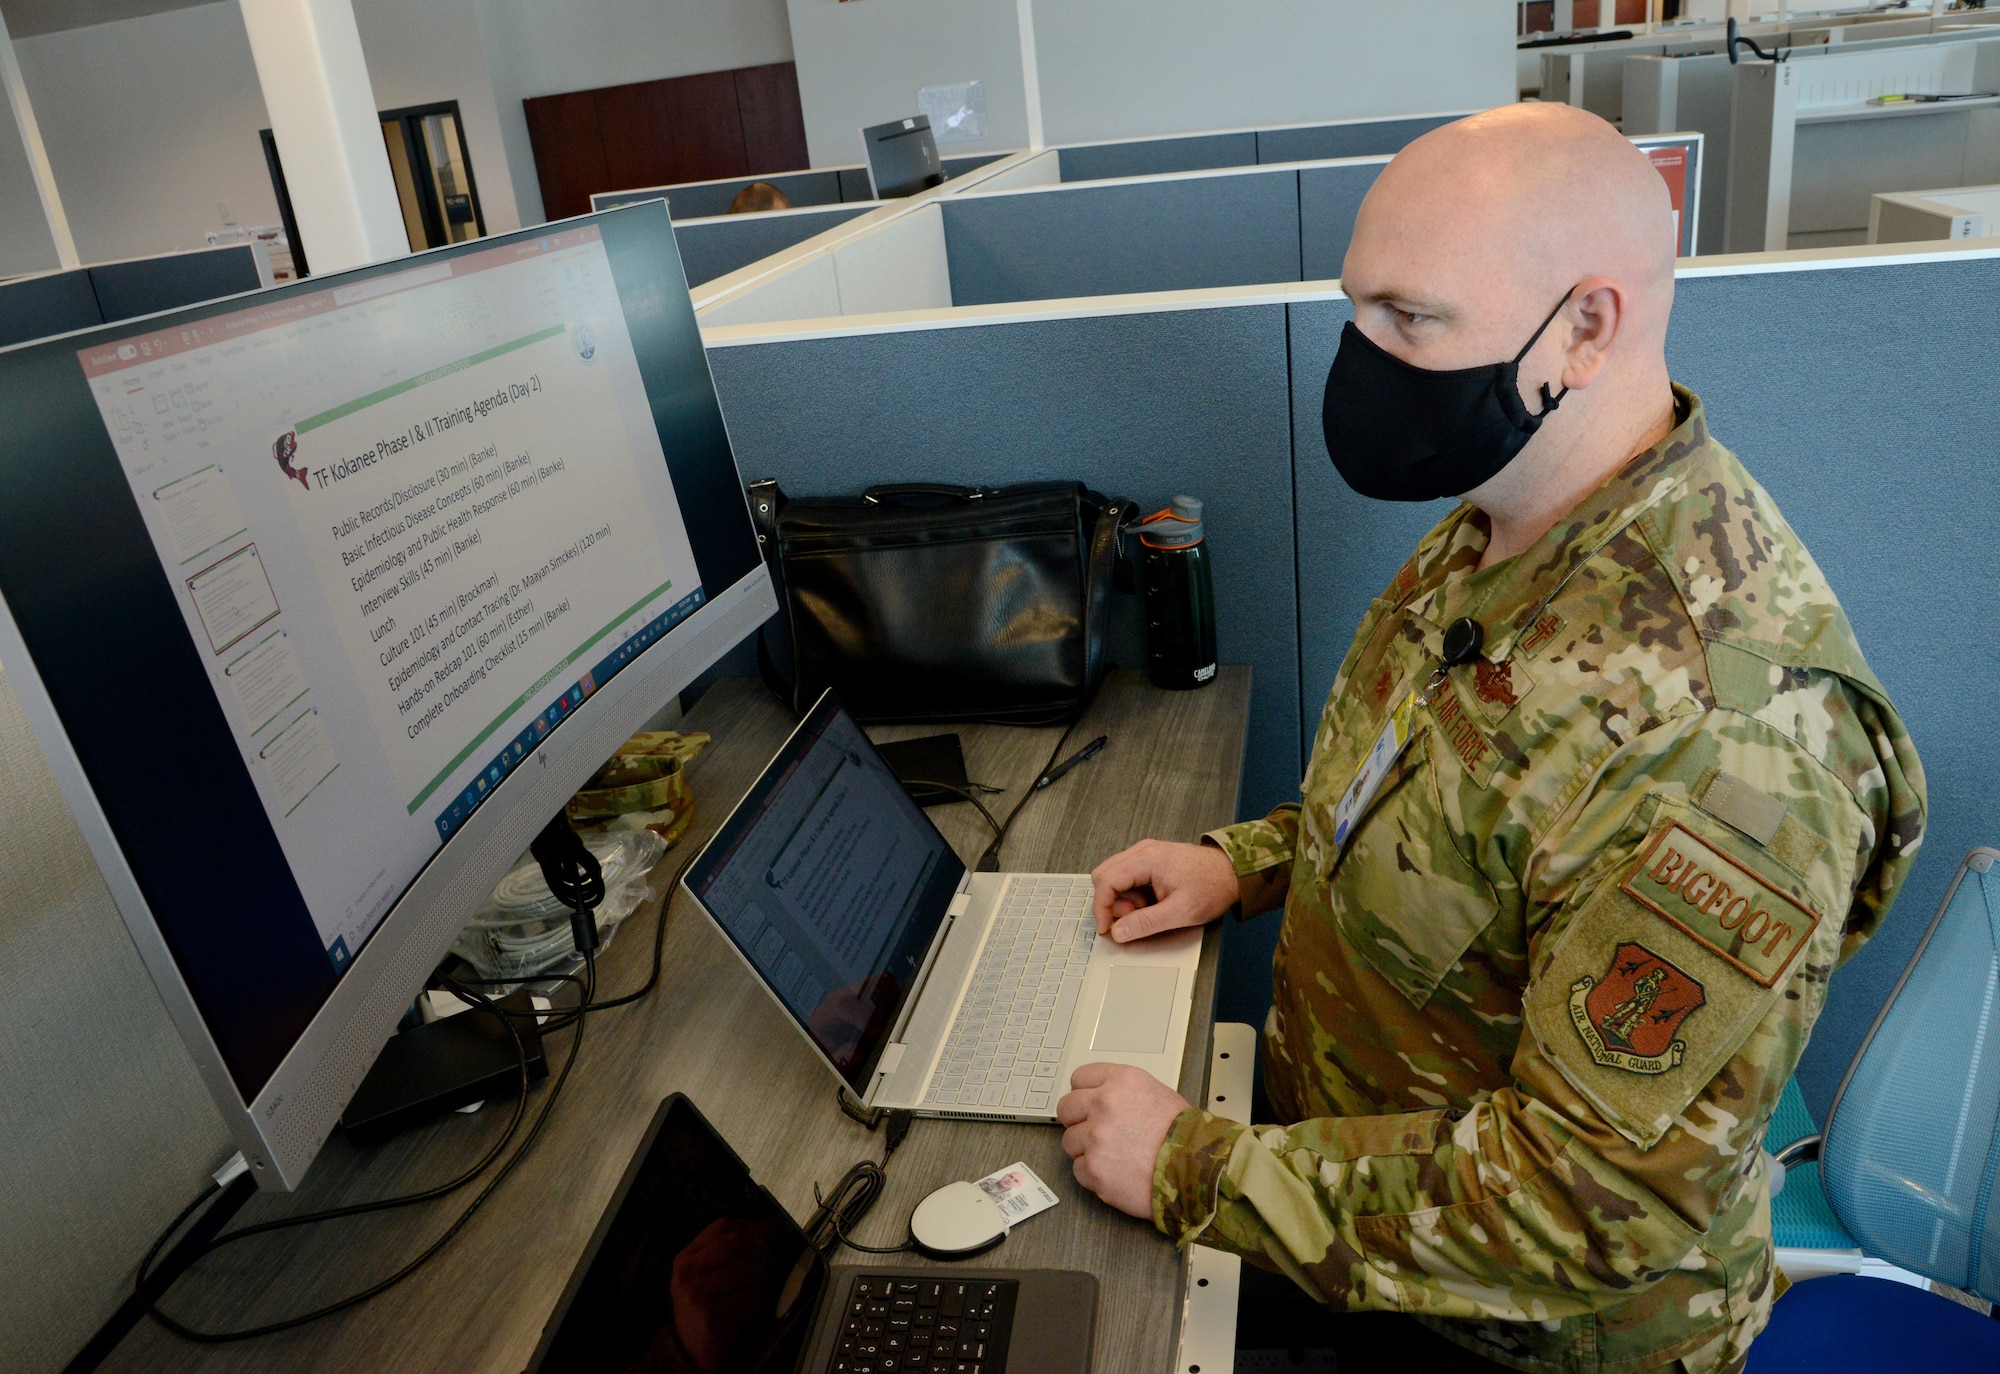 Washington Air National Guard Maj. Brian Banke, a chaplain with the Western Air Defense Sector, functions as the training manager for the COVID-19 mapping mission for the Washington National Guard at the Washington State Department of Health (DOH) offices in Tumwater, Washington, May 15, 2020. The Washington National Guard is supporting the DOH to prevent the spread of the coronavirus as Washington prepares to move to reopening parts of the state.